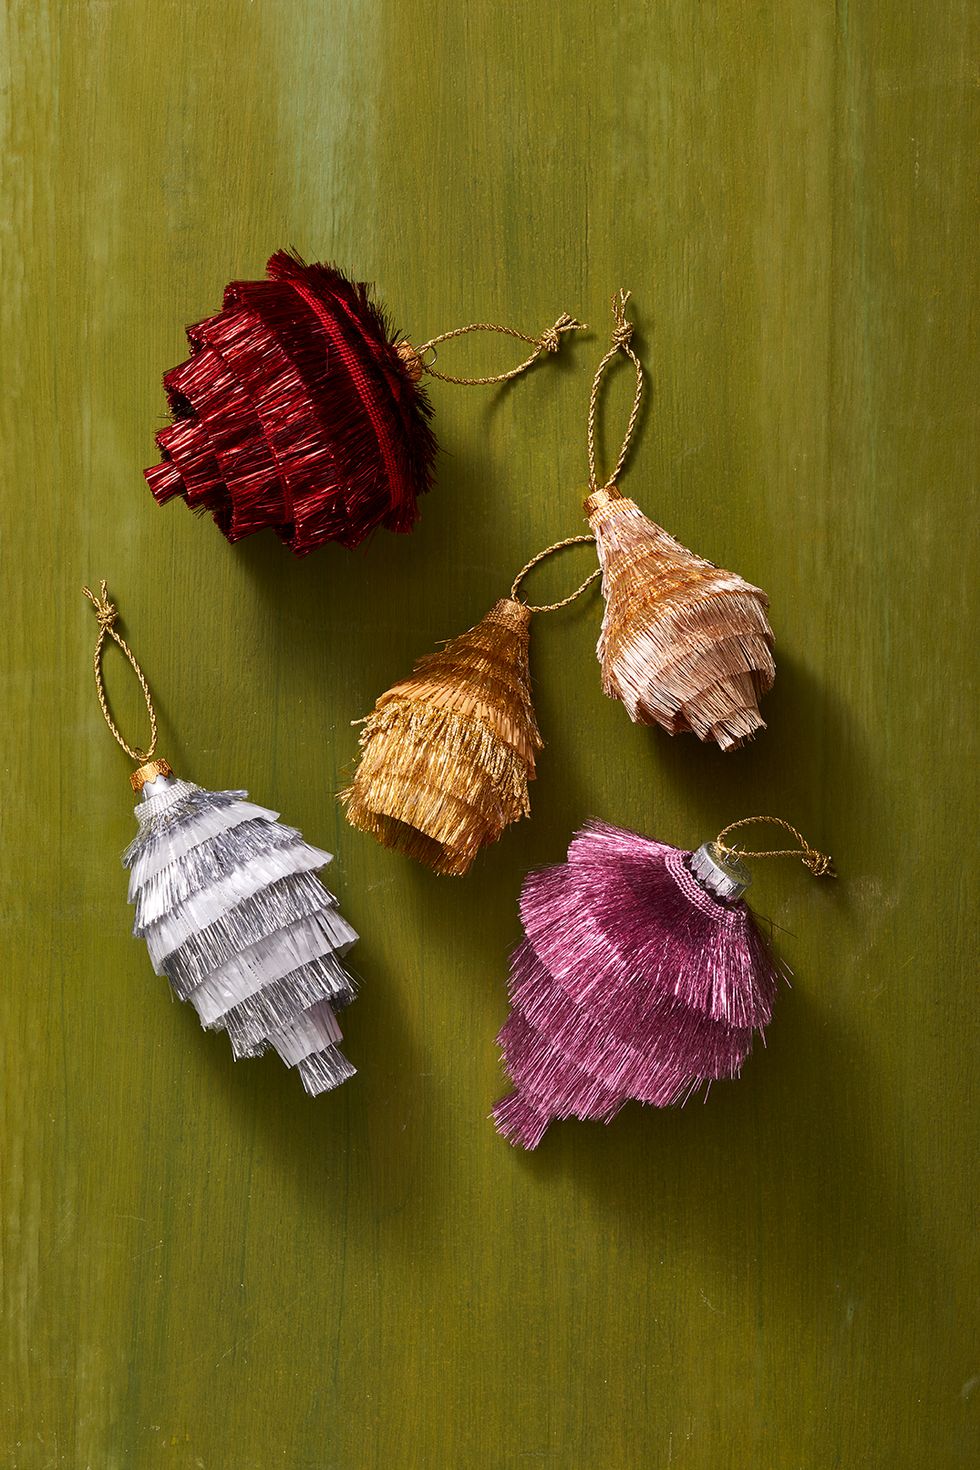 homemade christmas ornaments colorful ornaments made of colorful fringe